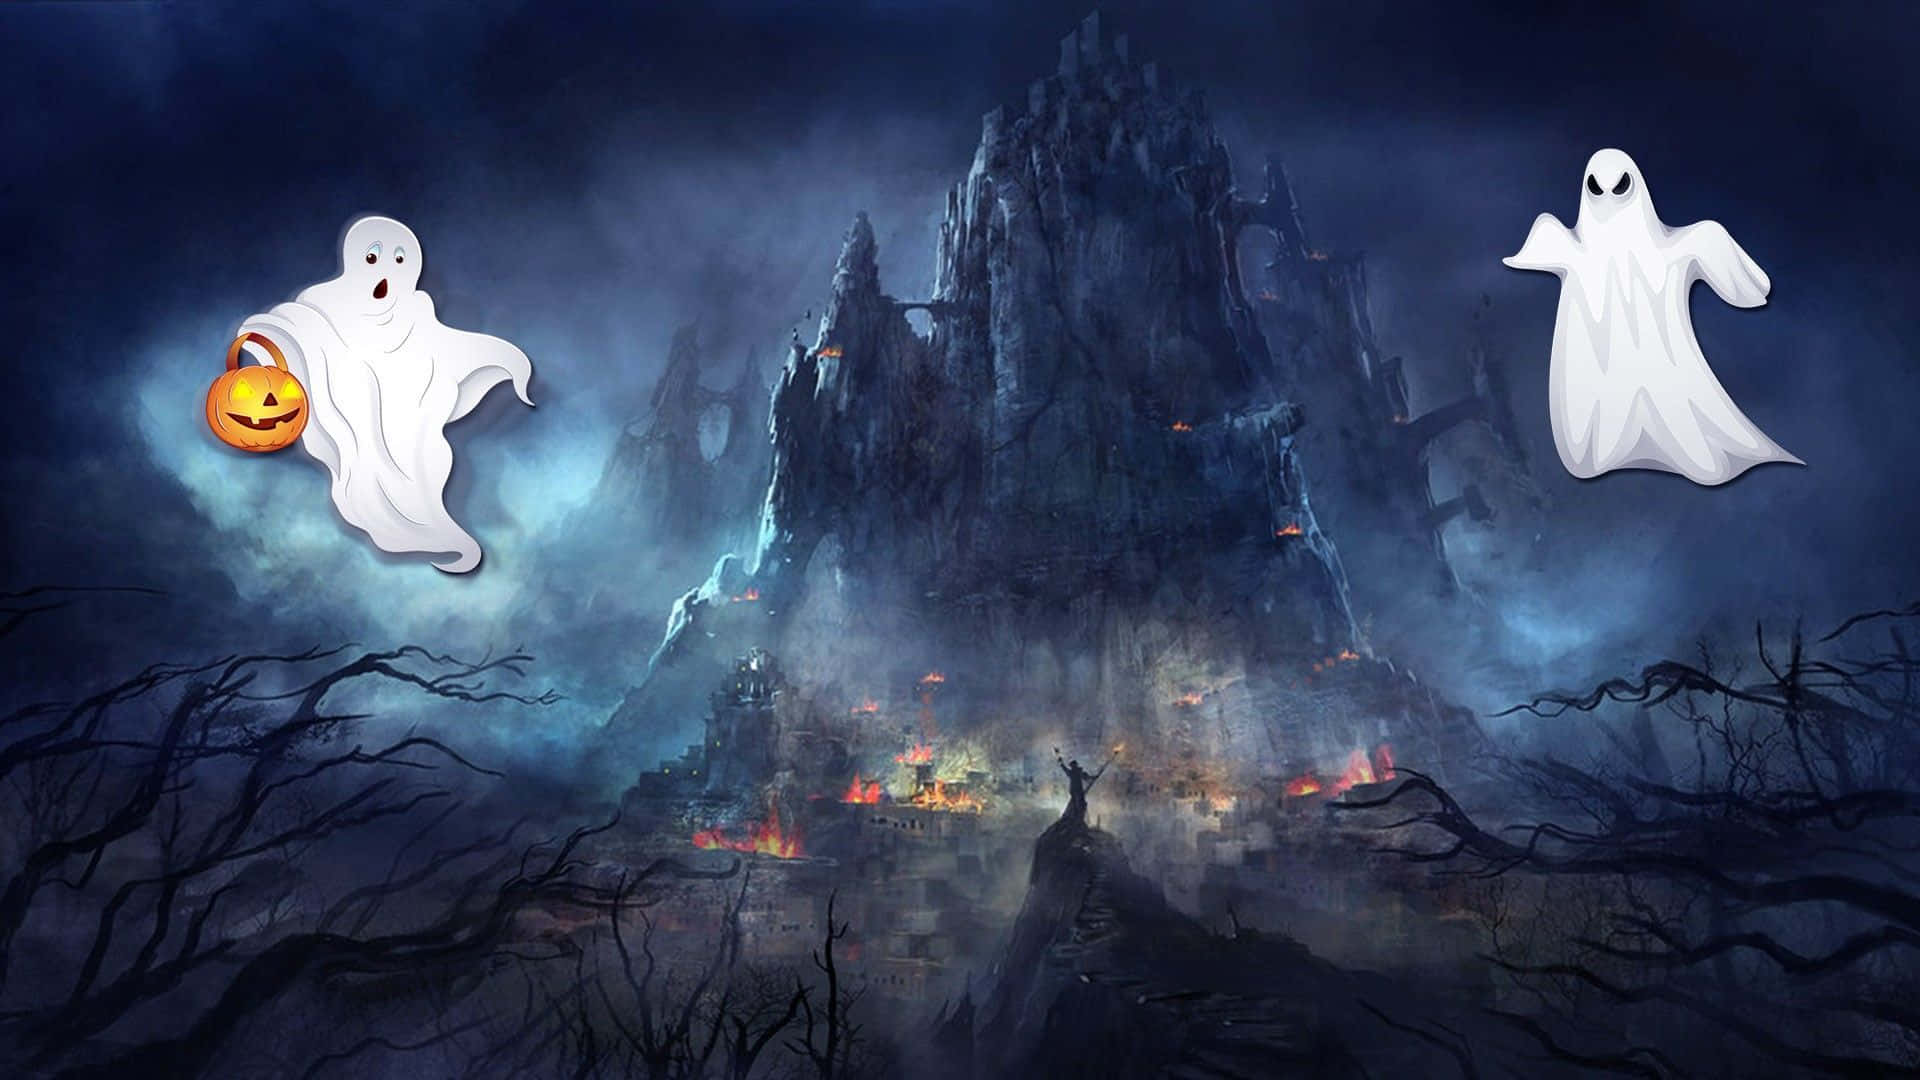 Get ready for Spooky Halloween with this creative background